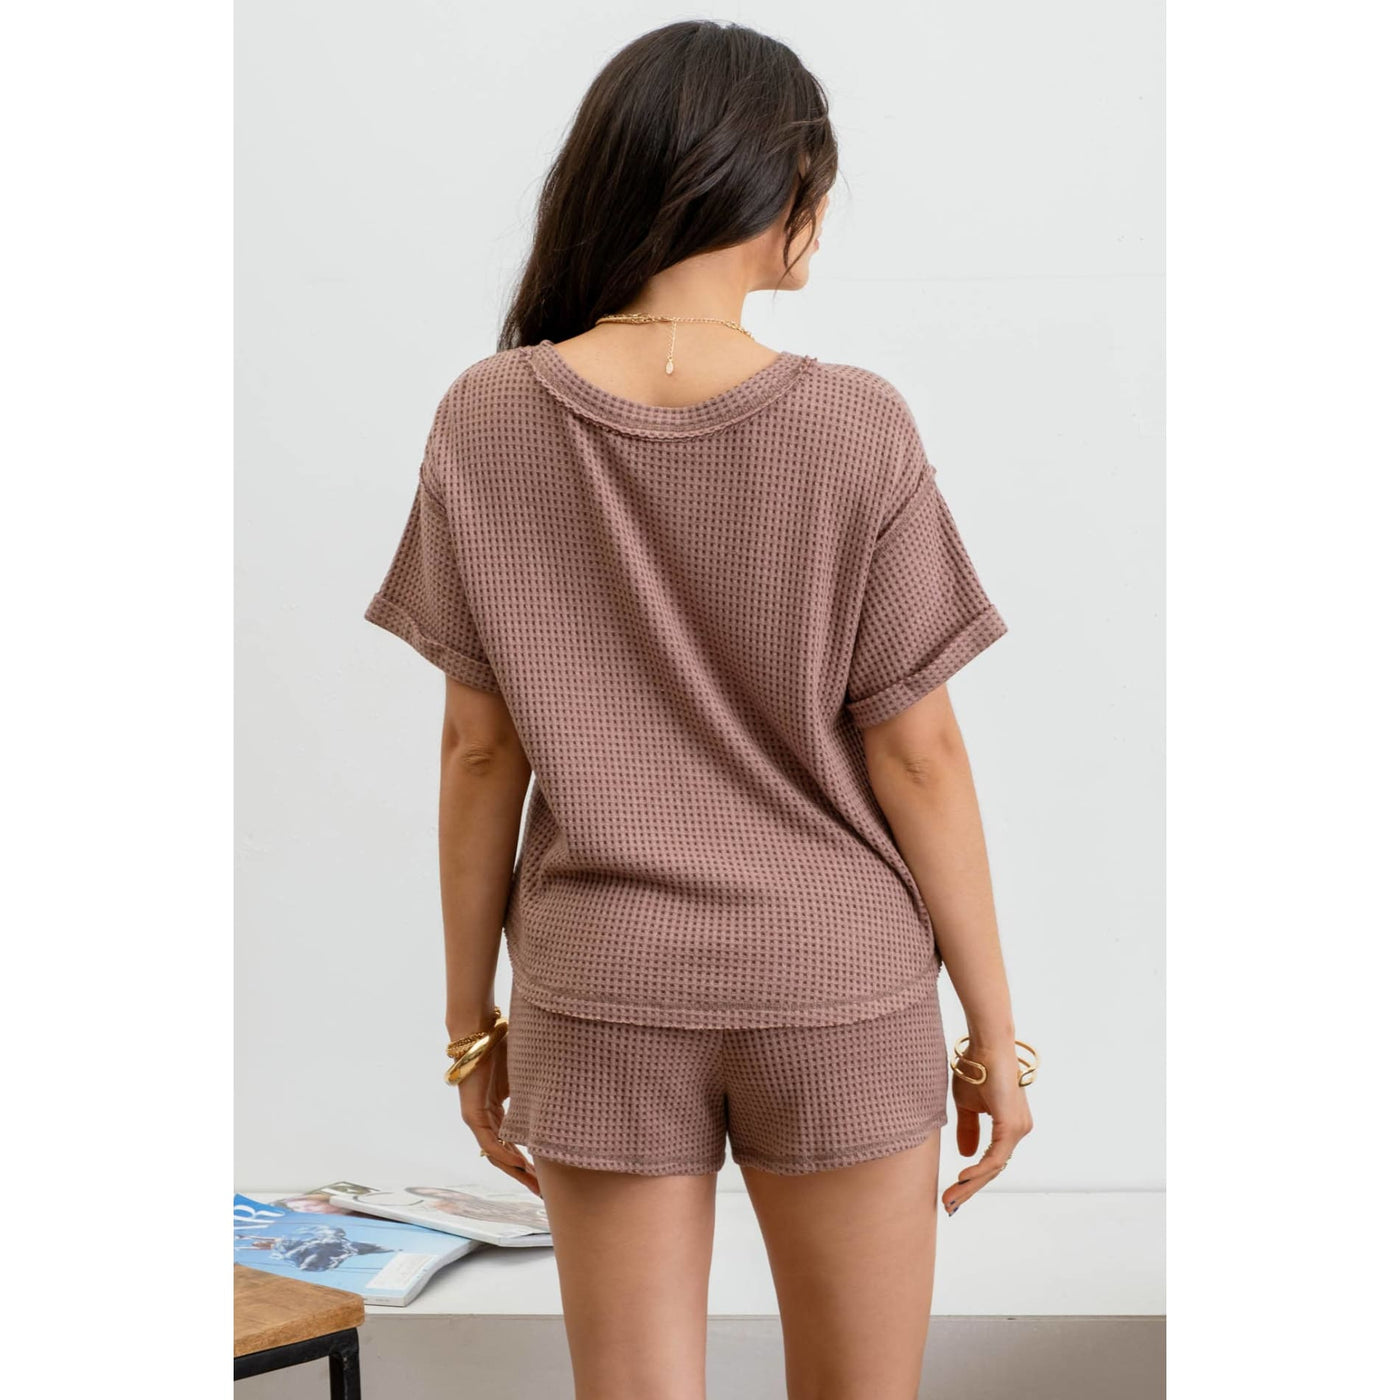 Staying In Today Lounge Top - 100 Short/Sleeveless Tops